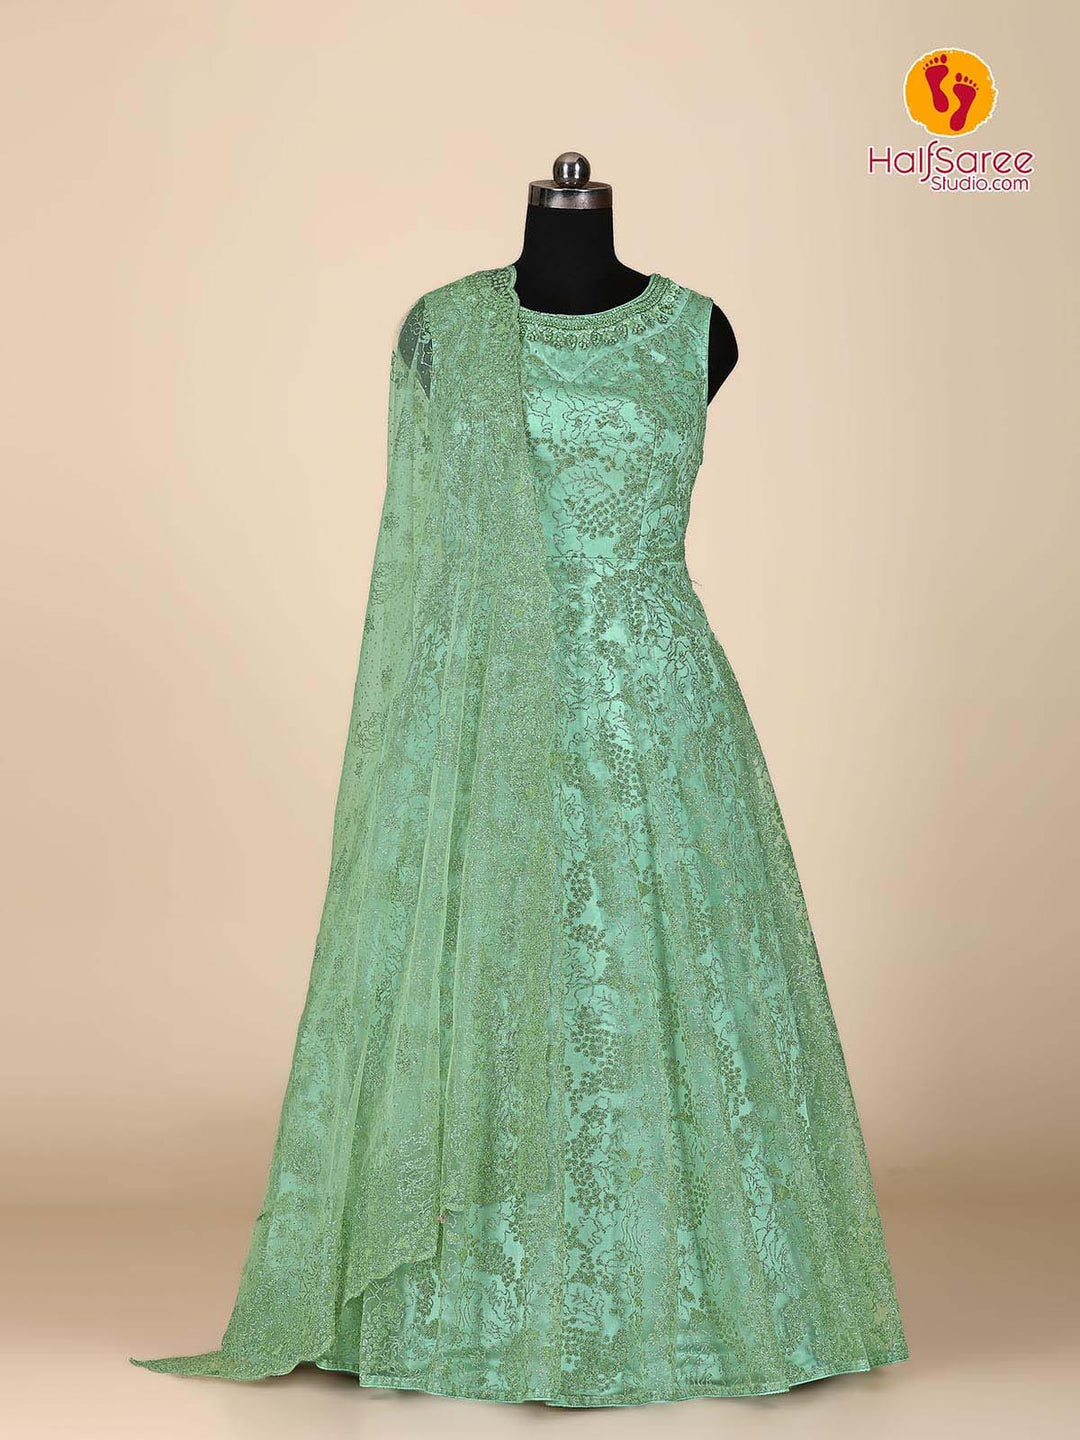 Buy Pista Colour gown for latest fashion trends in india